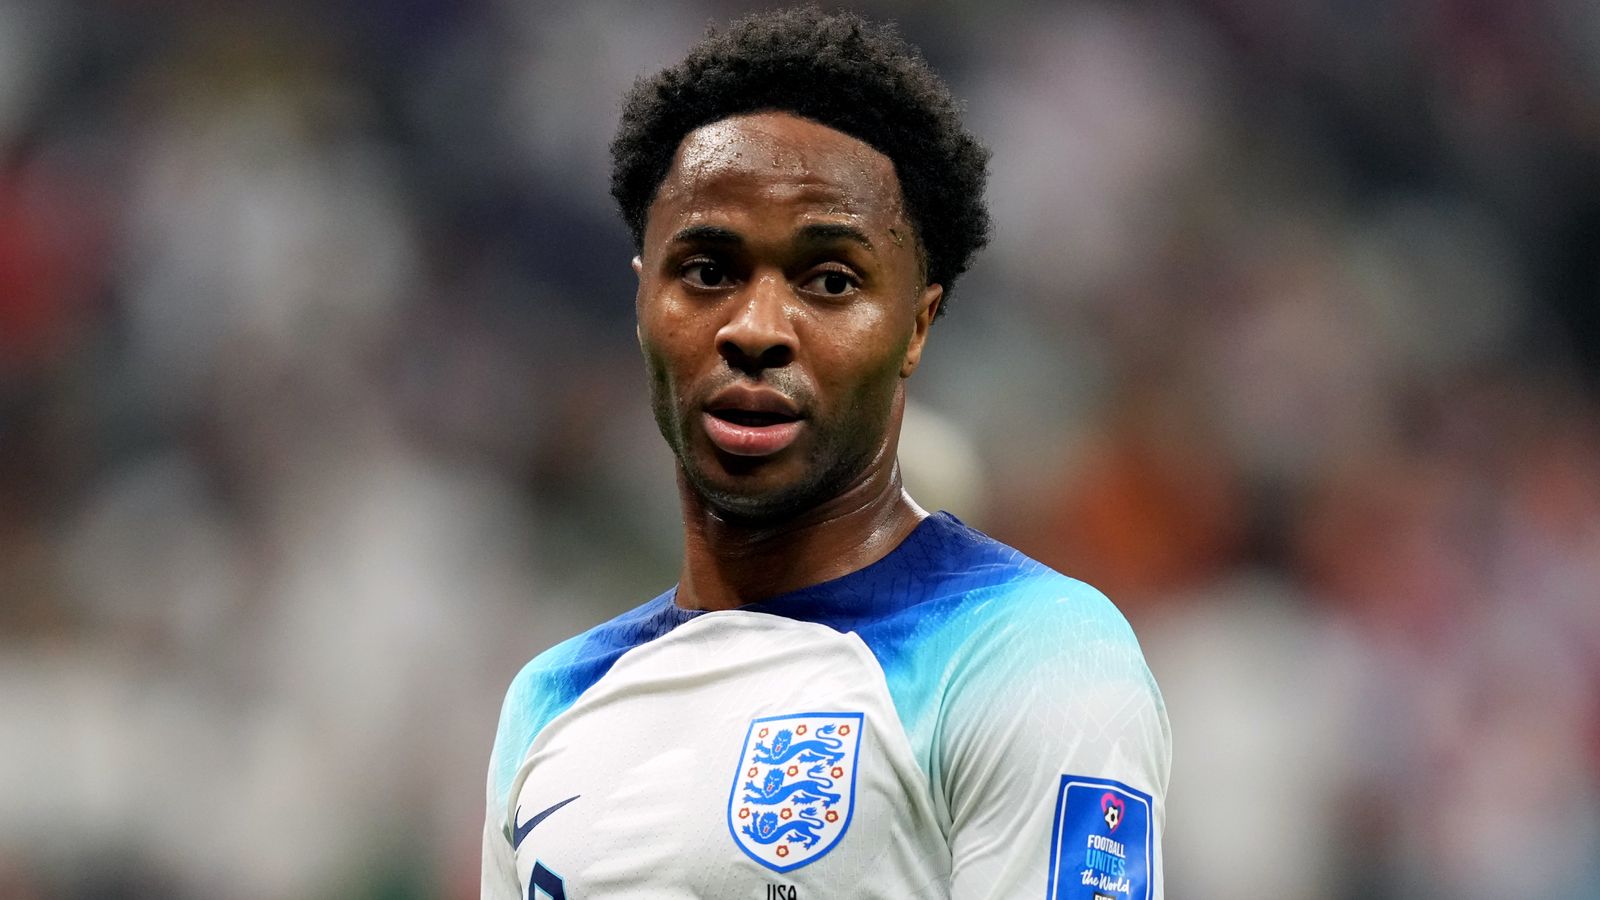 England's Raheem Sterling flies back from Qatar after armed intruders break into family home